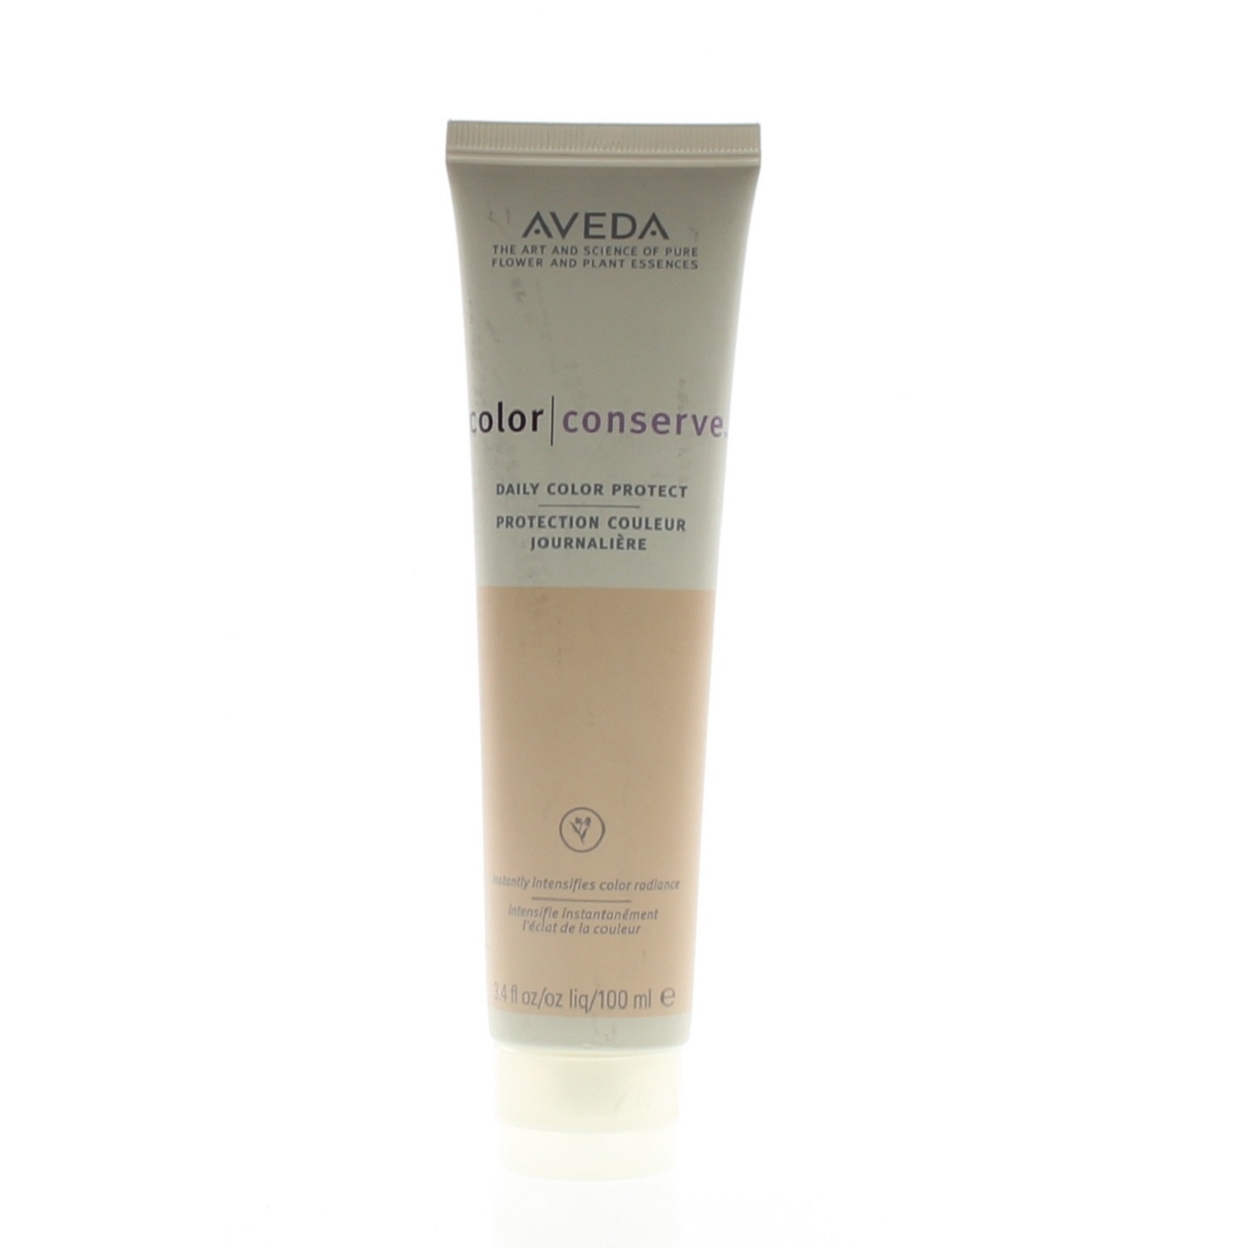 Aveda Color Conserve Daily Color Protect 3.4oz/100ml